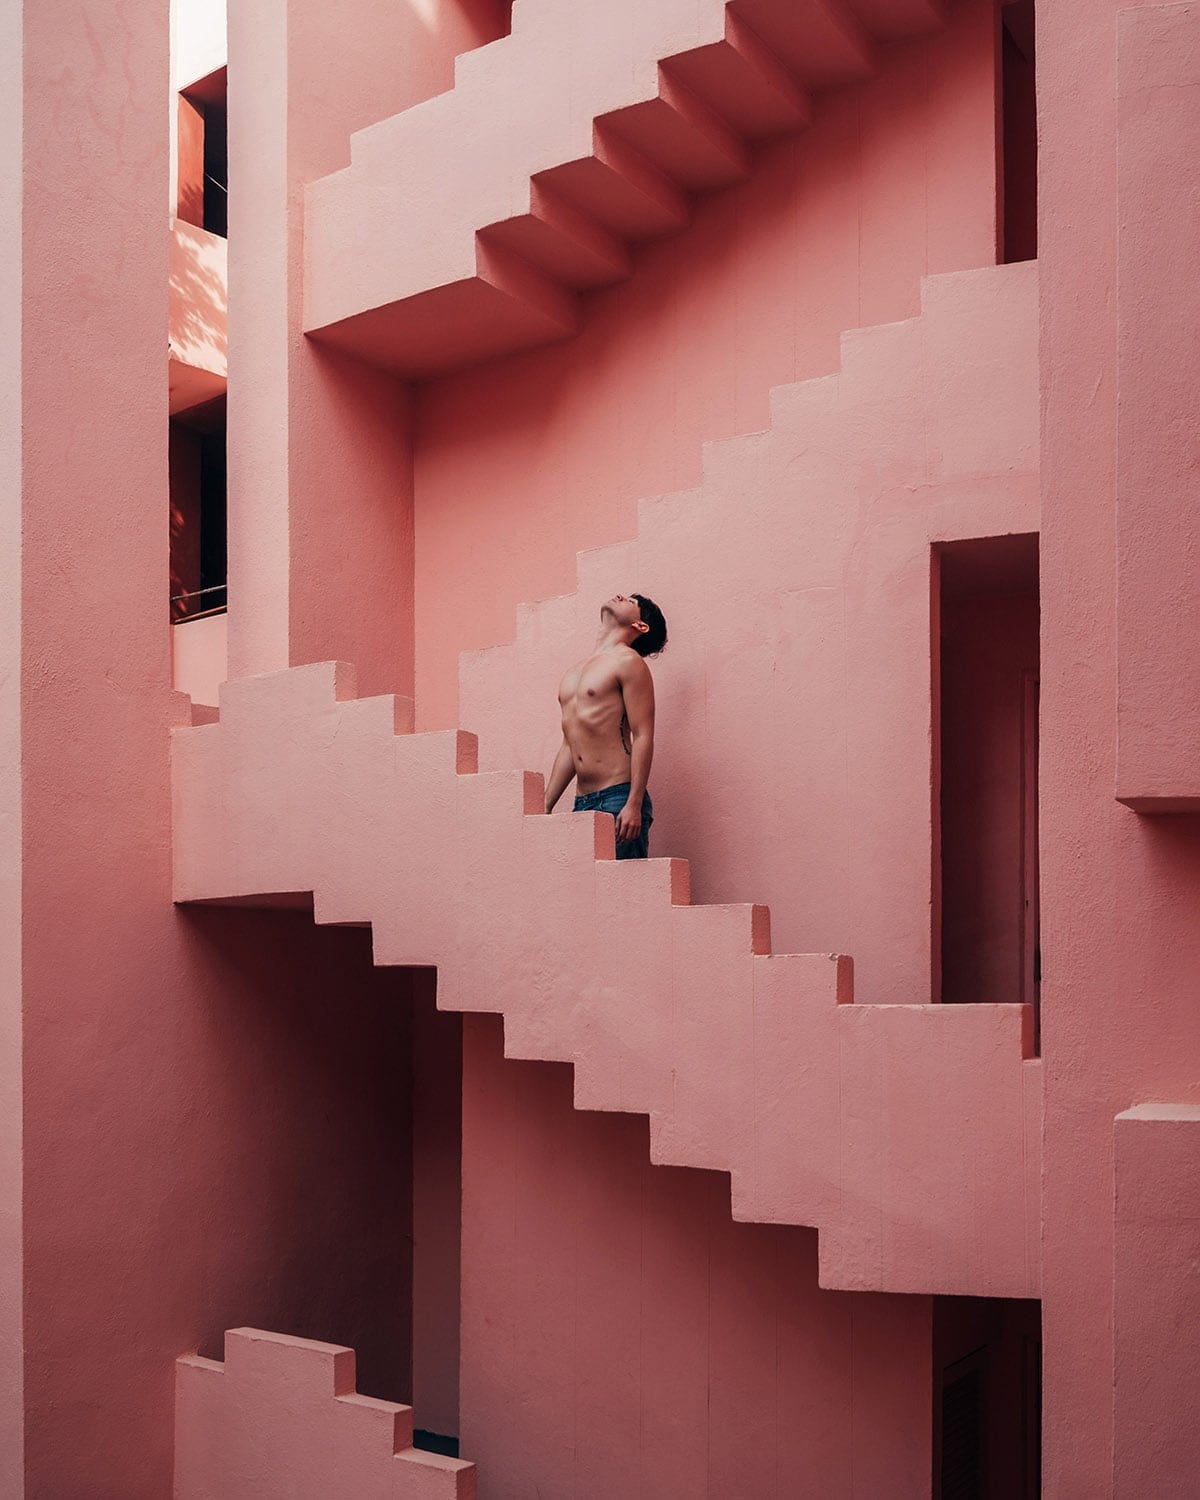 Conceptual portrait and architectural photography shot by London editorial fashion photographer Ira Giorgetti